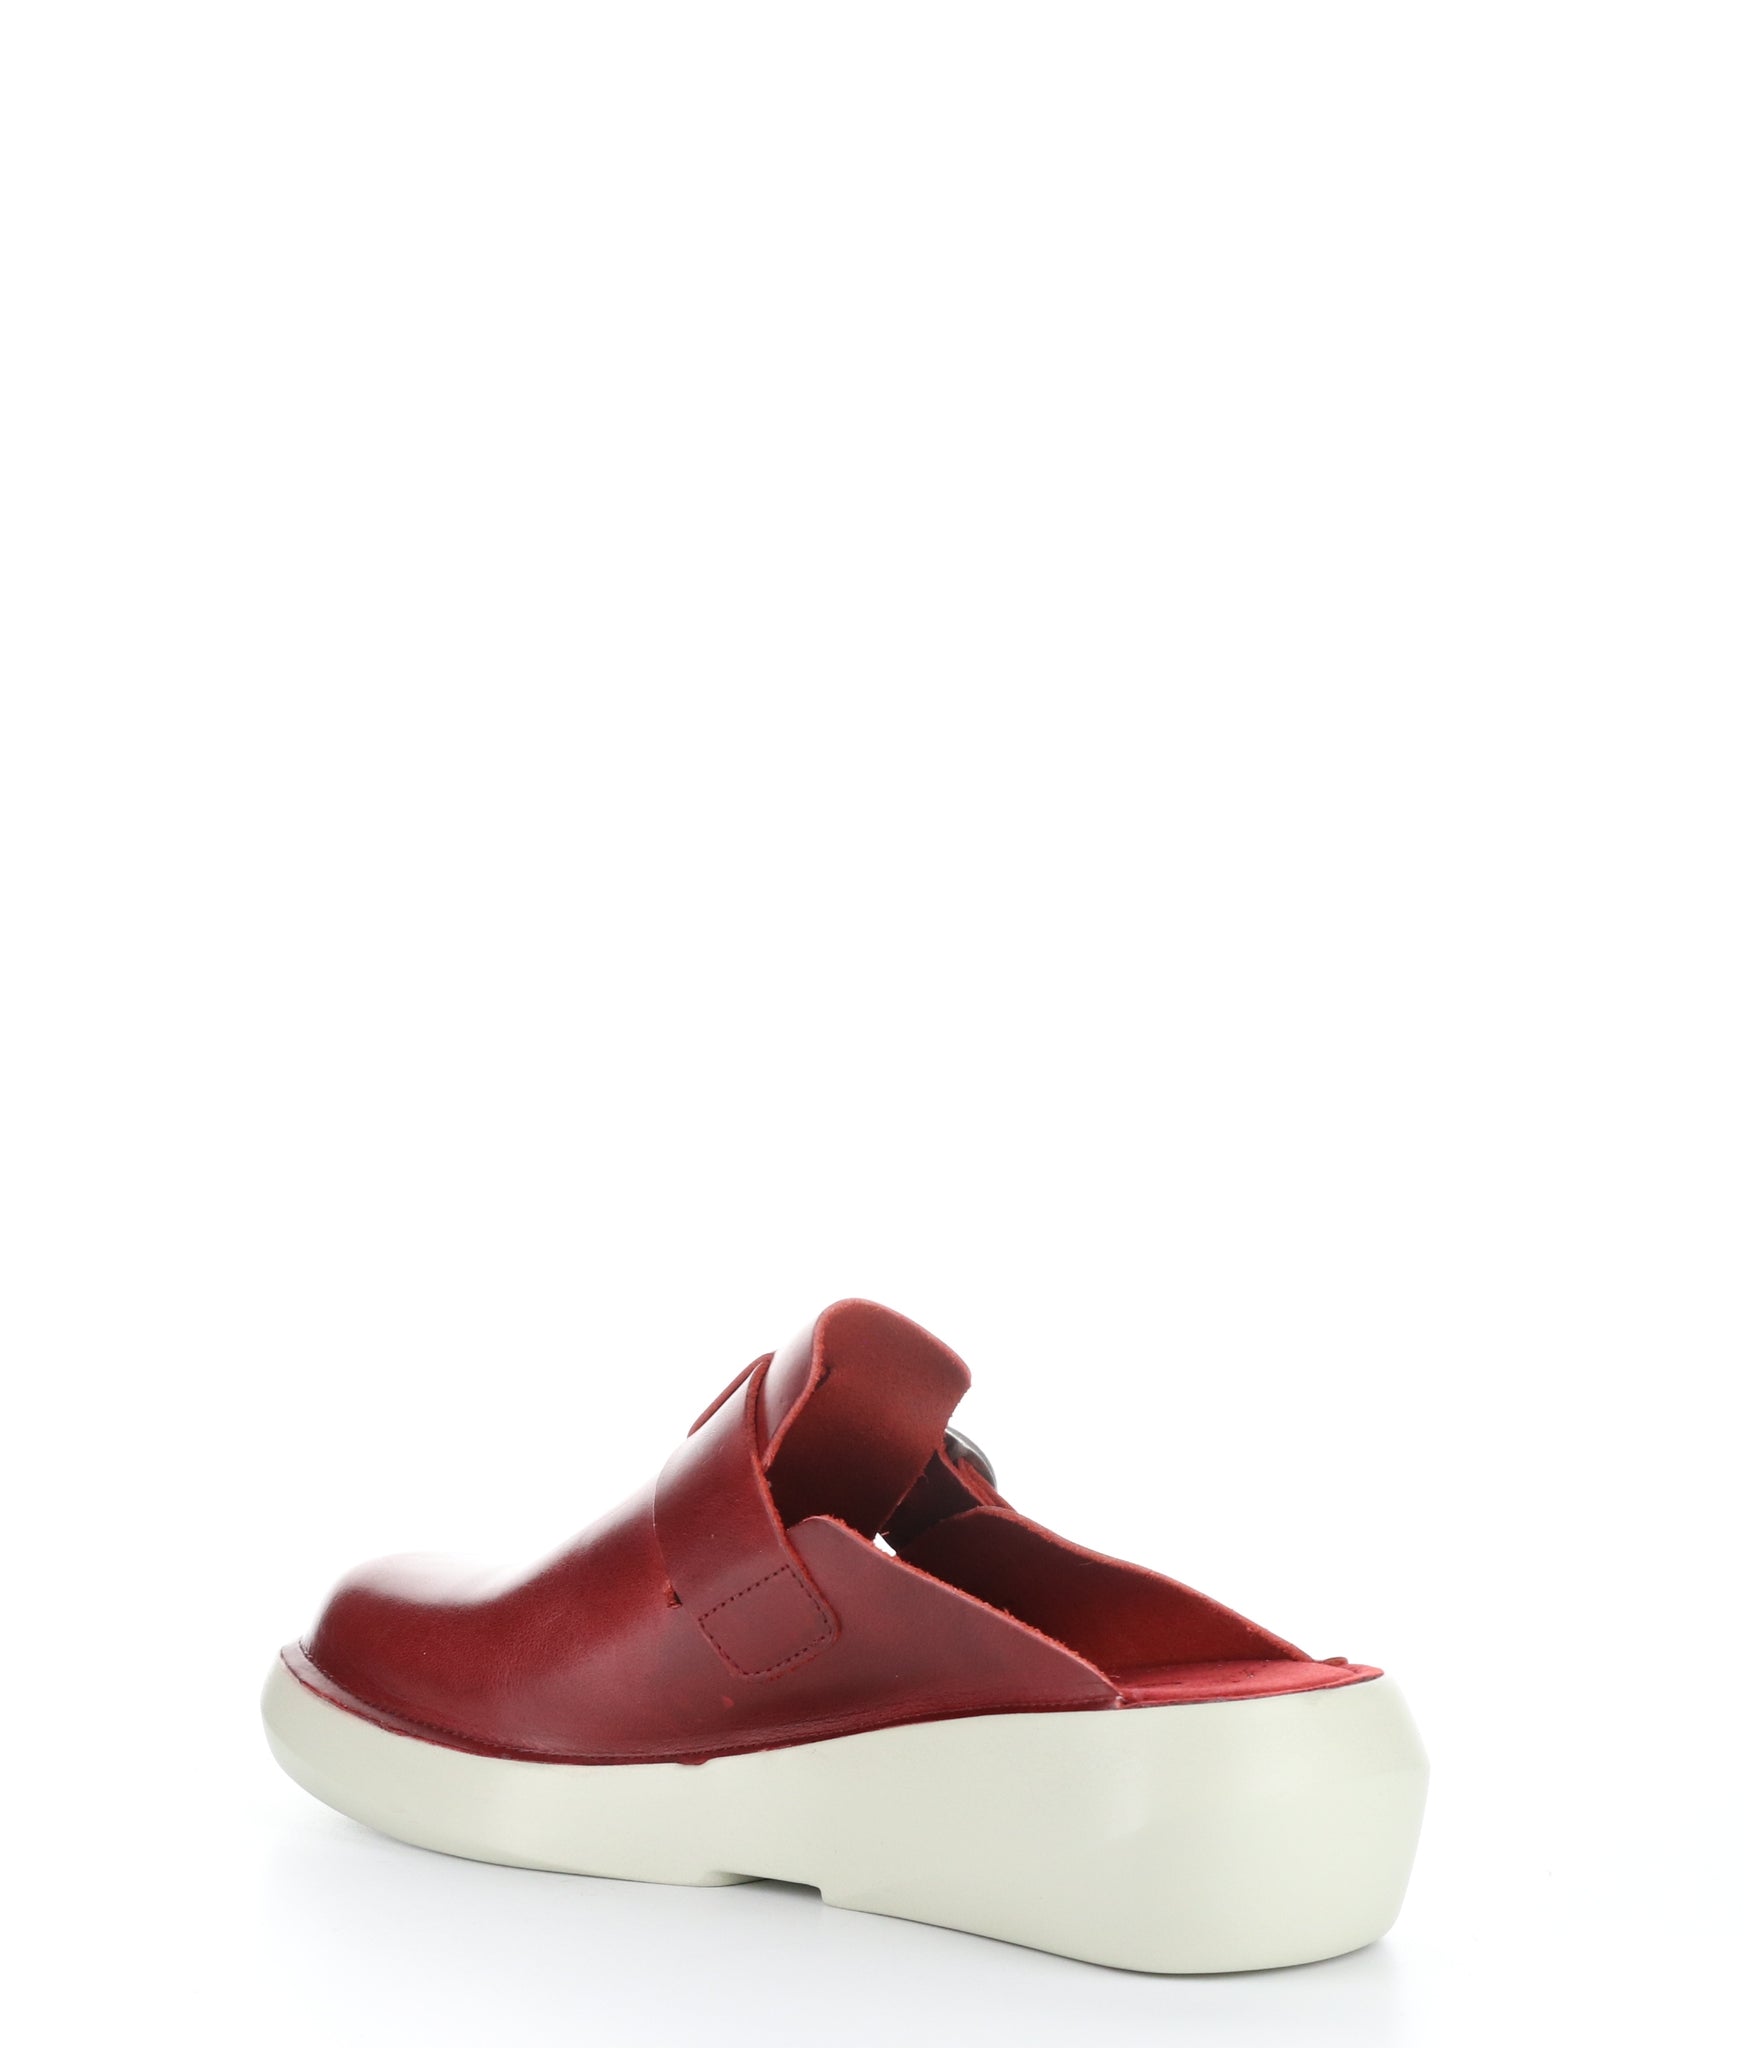 Fly London "Boll" Red - Clog